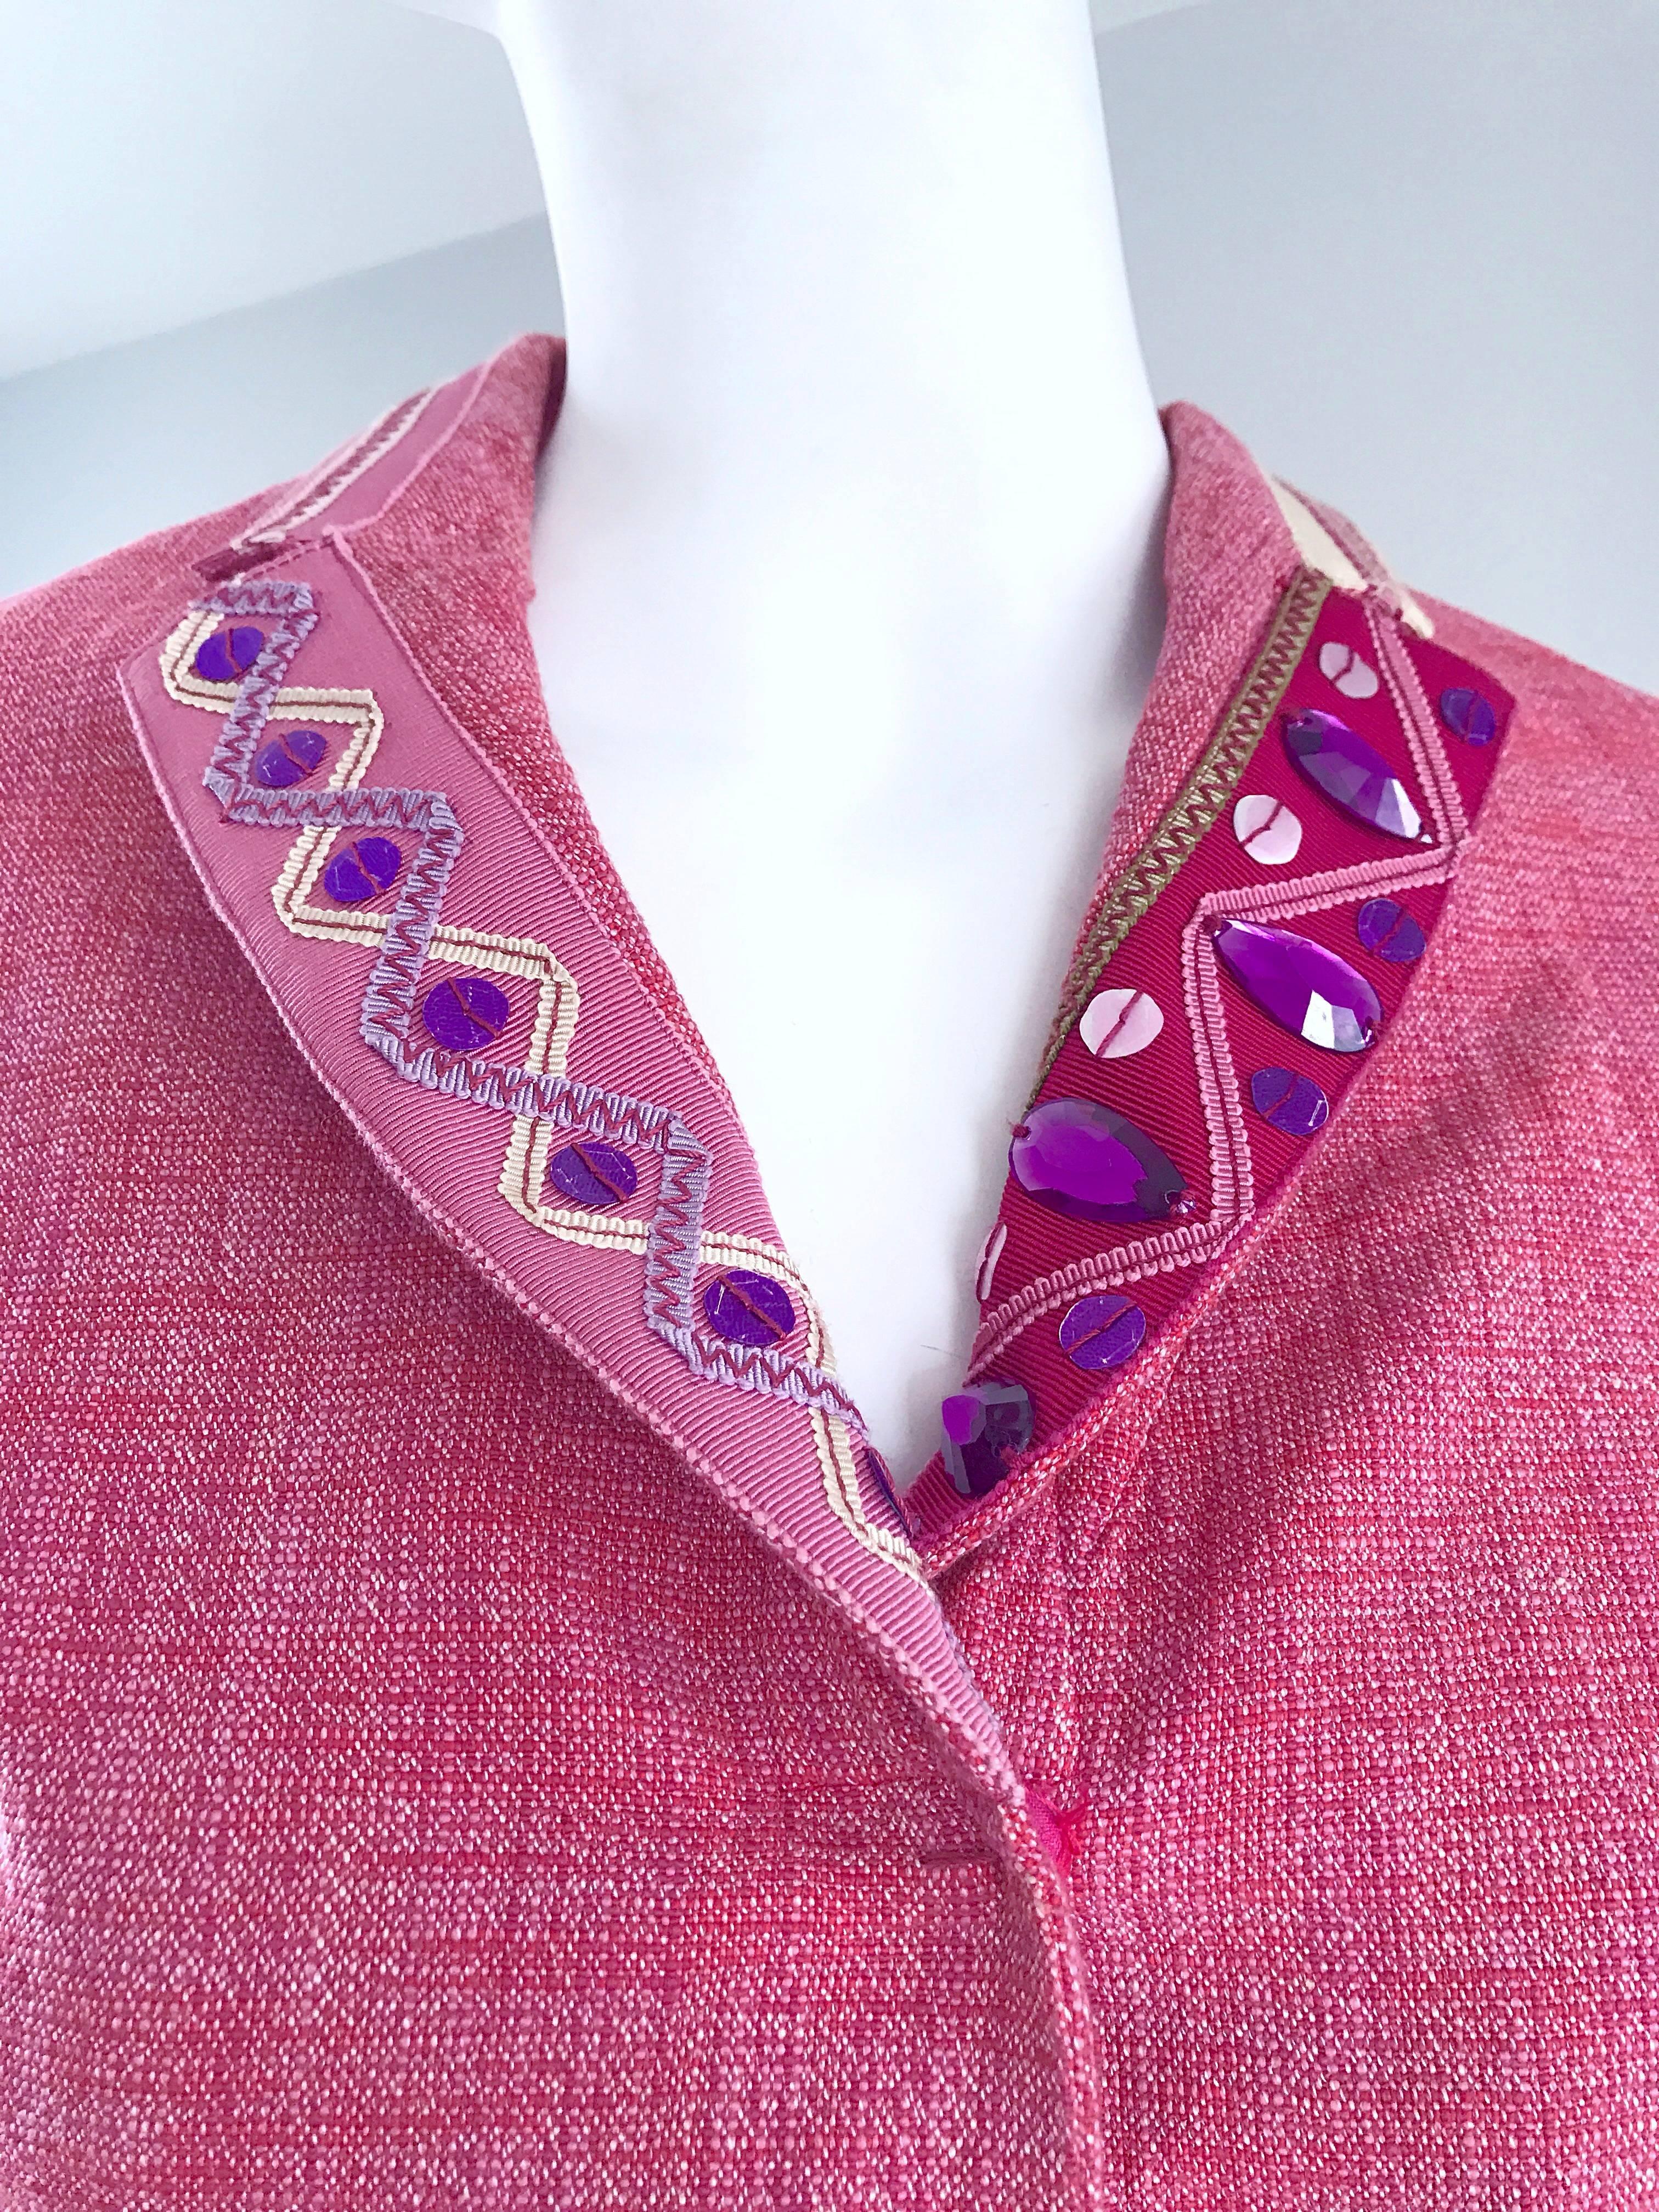 Vintage Moschino Cheap & Chic 1990s Size 12 Pink Beaded Belted Blazer Jacket In Excellent Condition For Sale In San Diego, CA